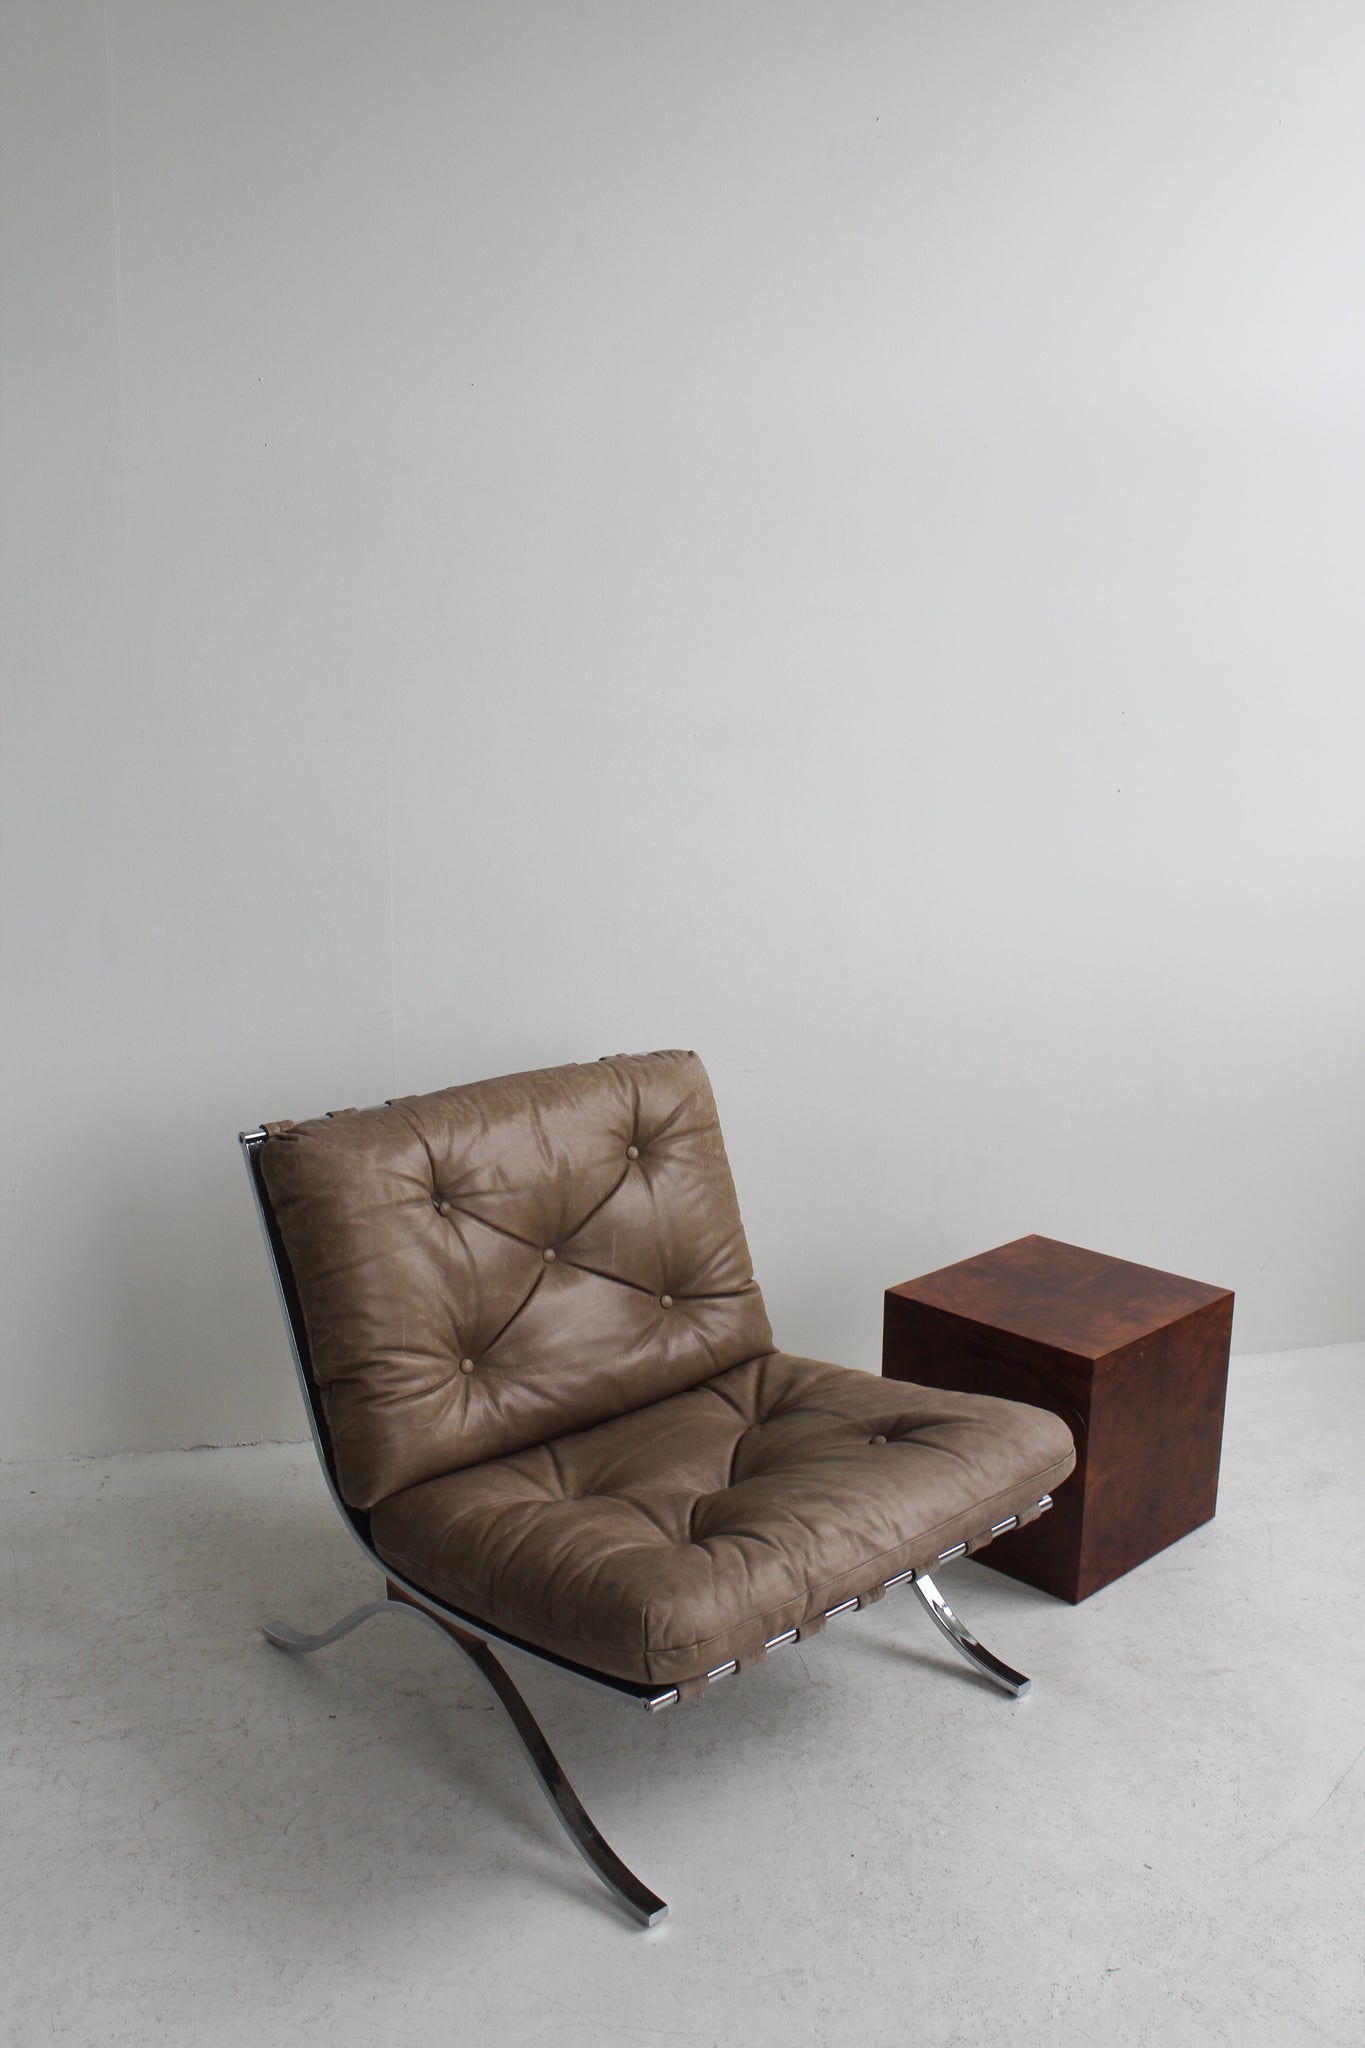 Tufted Leather Lounge Chair